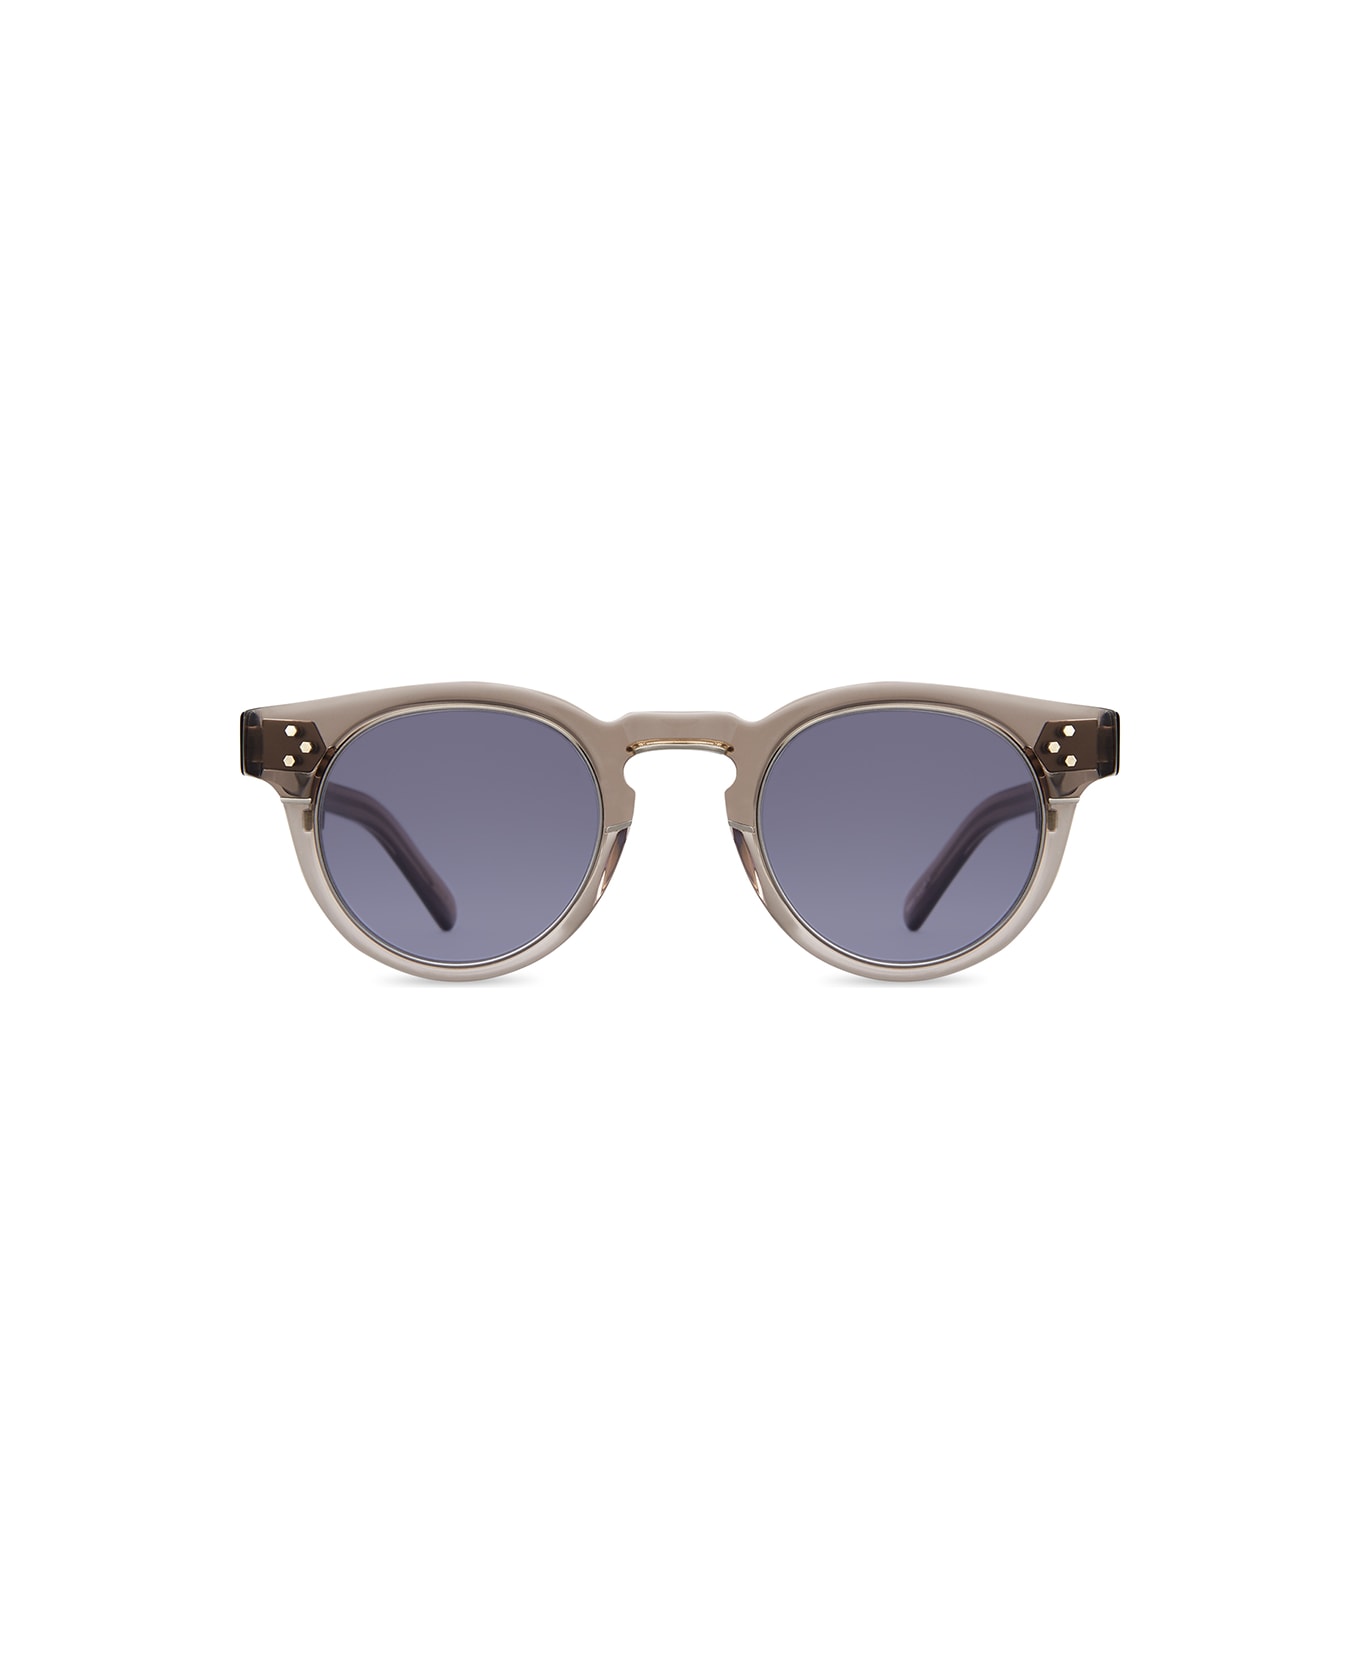 Mr. Leight Kennedy S Grey Crystal-matte Platinum Sunglasses -  Grey Crystal-Matte Platinum